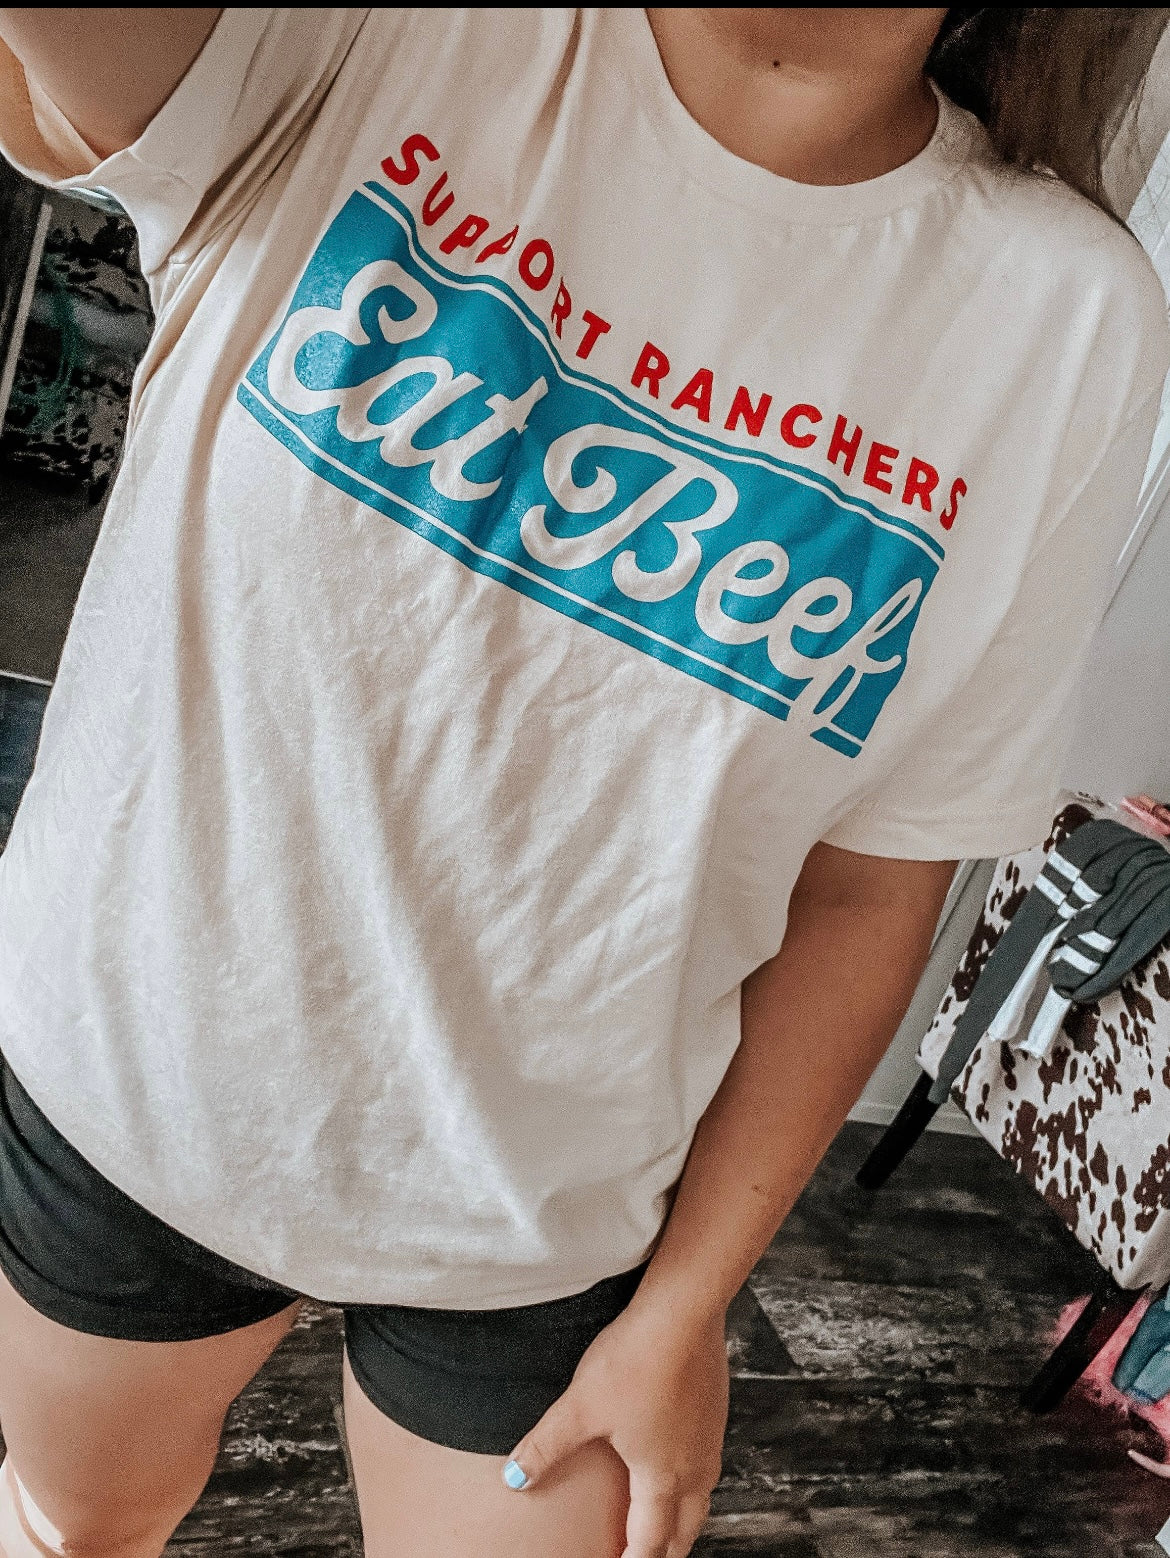 Support Ranchers - Eat Beef Tee